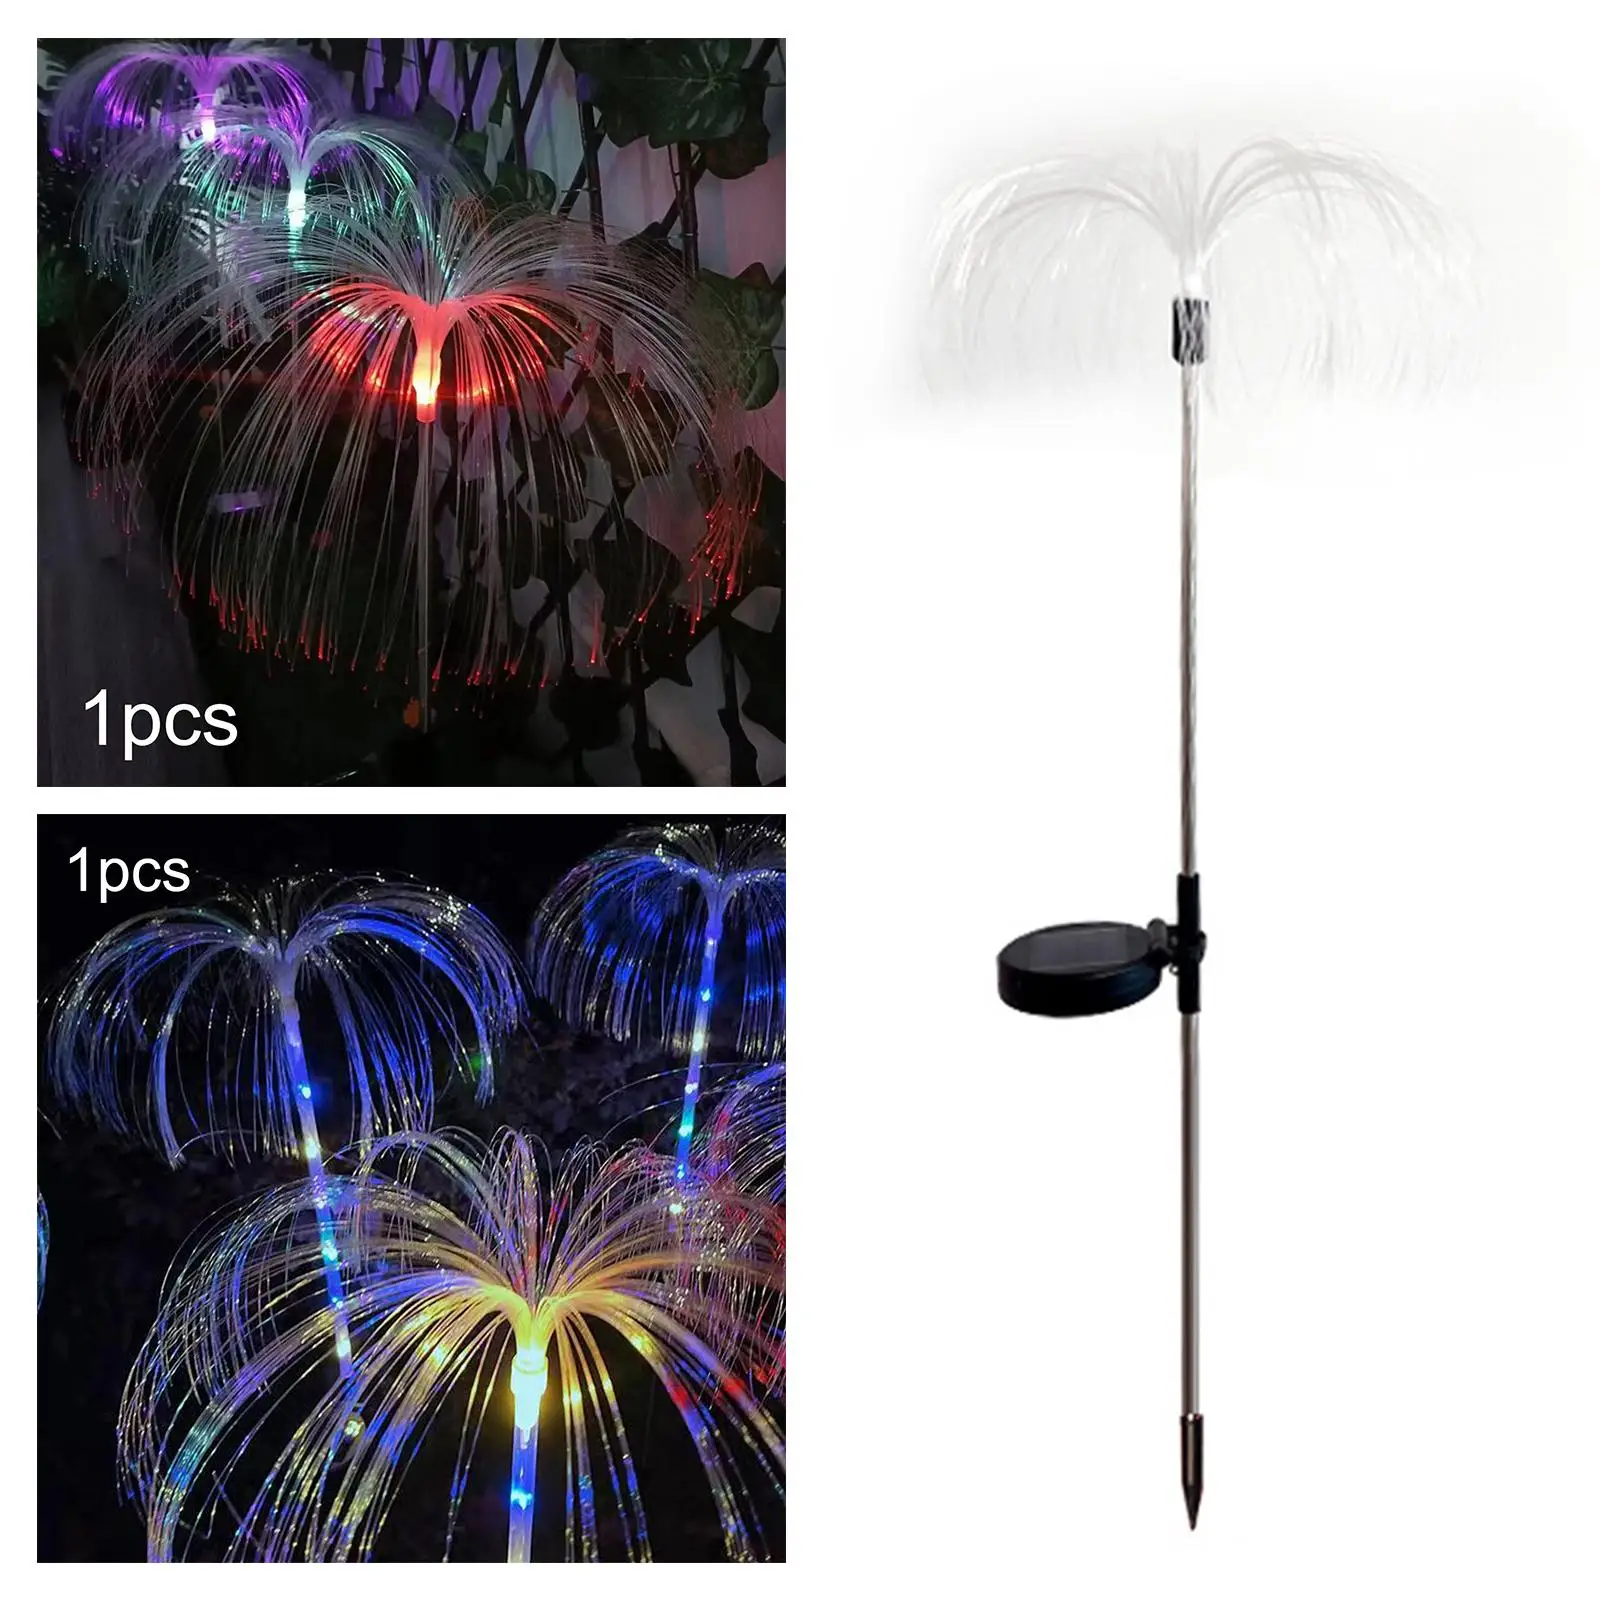 Decorative Solar Powered Jellyfish Stake Lights Landscape Dusk to Dawn Stakes Lamp for Garden Walkway Backyard Patio Ornaments